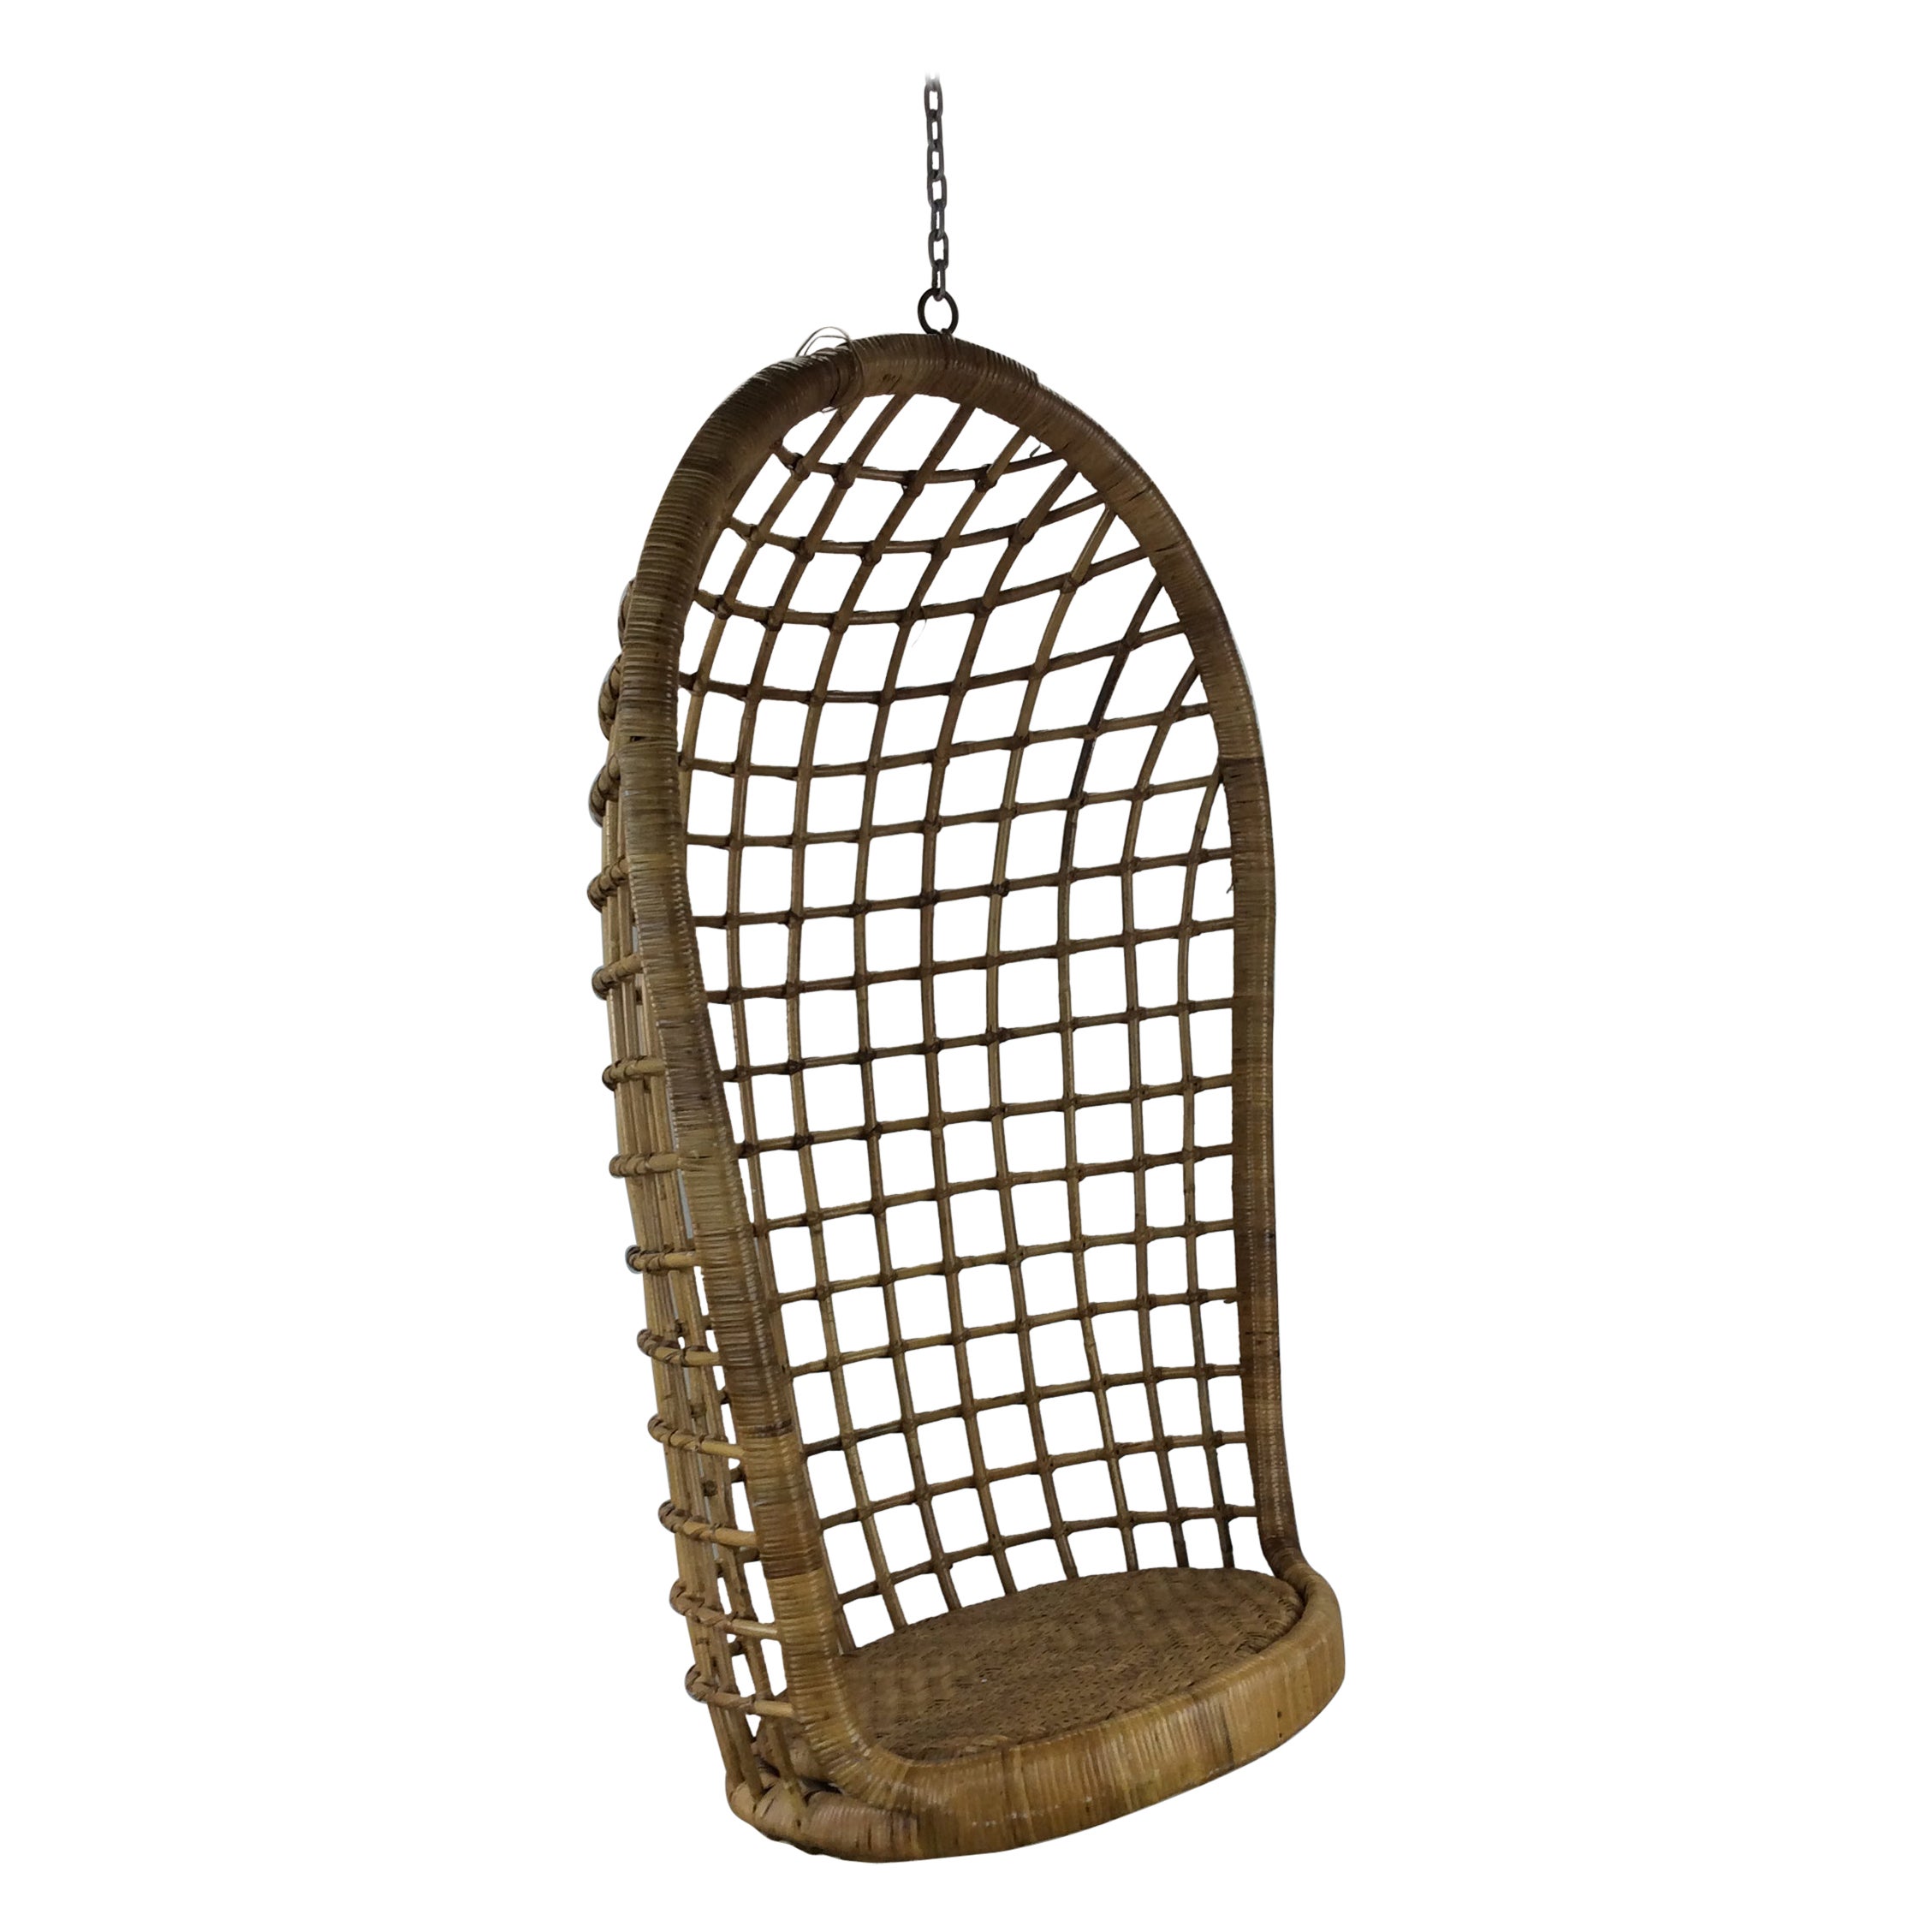 Vintage Boho Chic Rattan Hanging Swing Chair For Sale